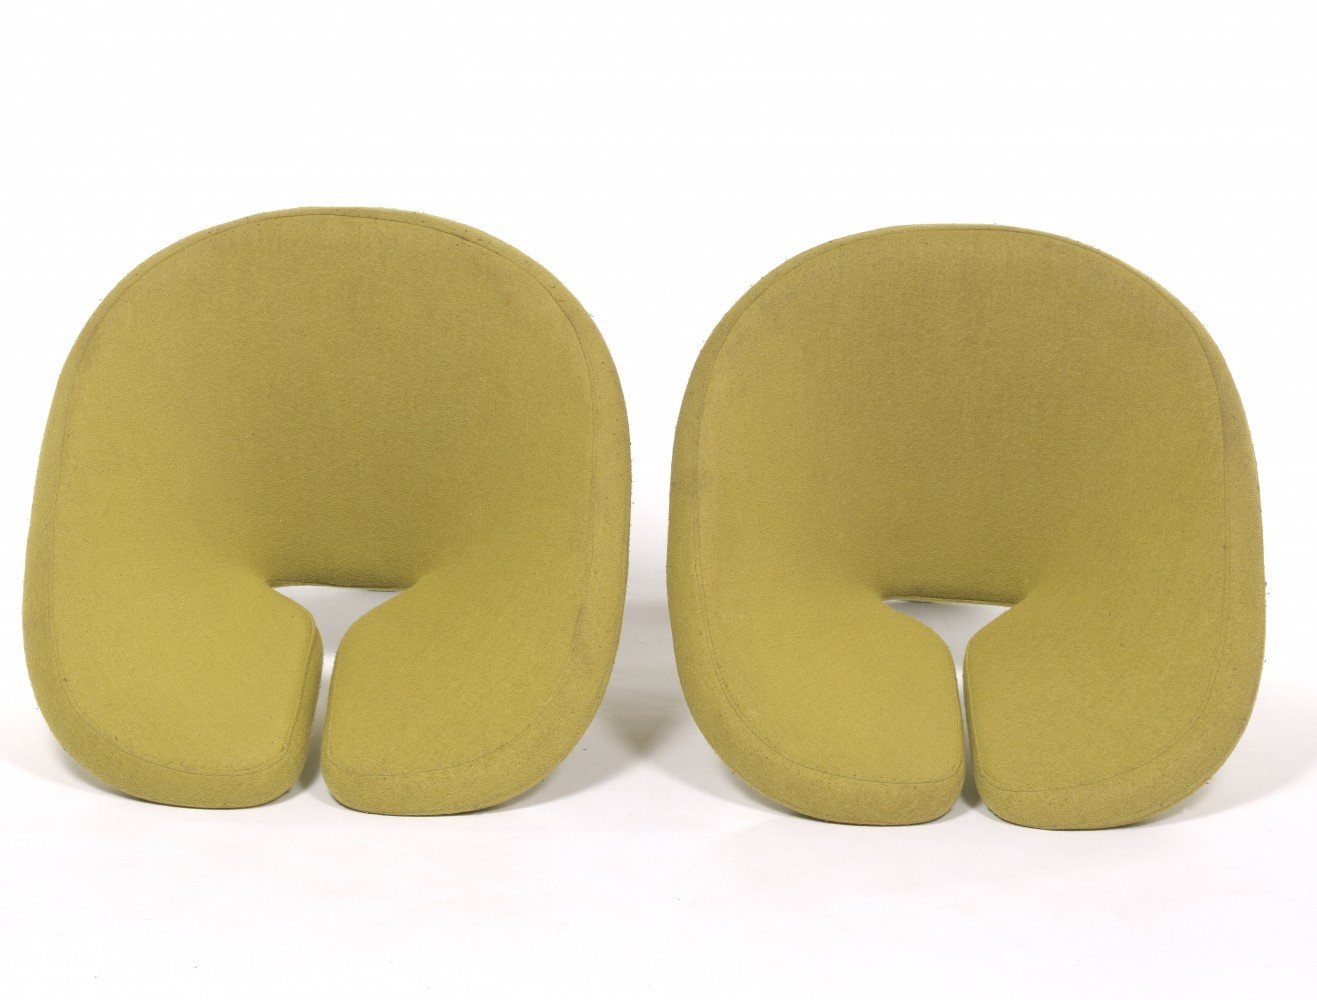 Swivel chair with foamed wooden shell, connected to the aluminum base with chrome tube, upholstered in chartreuse by French Artist Norguet 